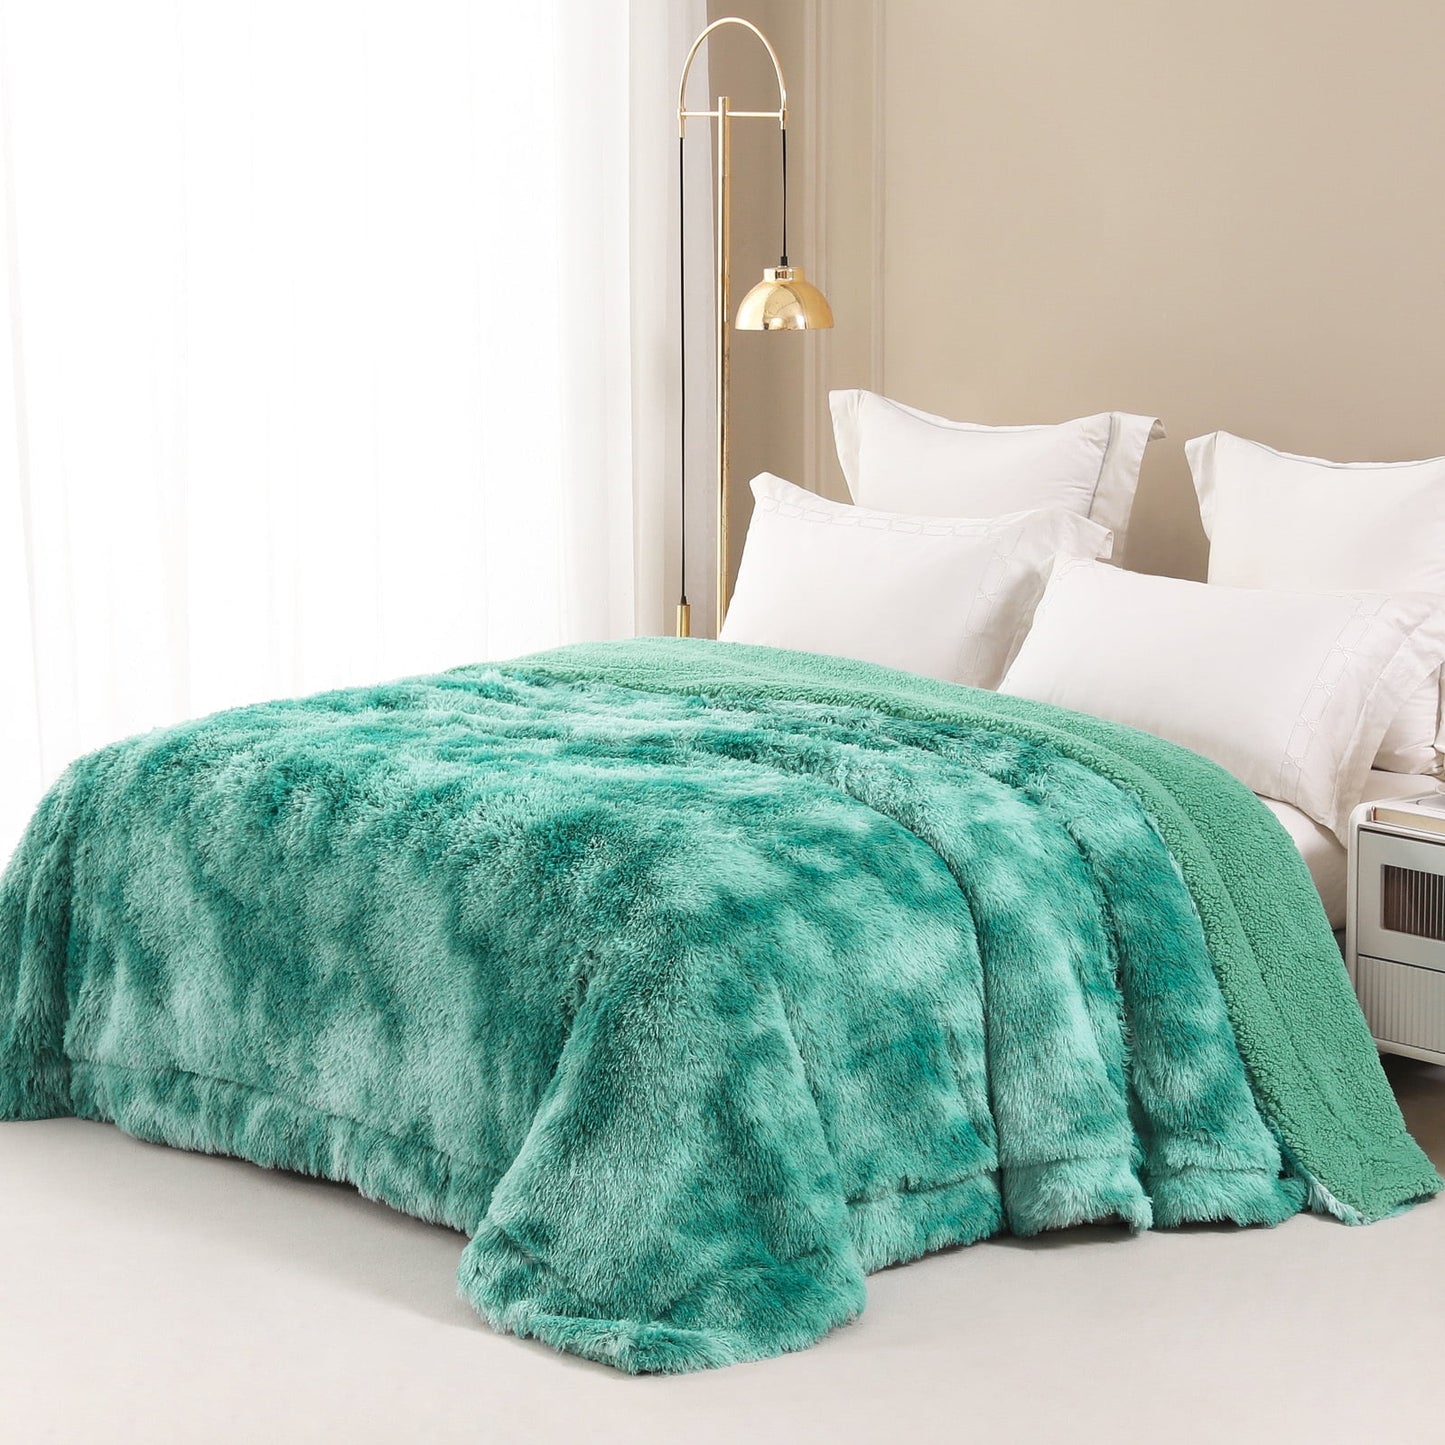 Exclusivo Mezcla King Size Faux Fur Bed Blanket, Super Soft Fuzzy and Plush Reversible Sherpa Fleece Blanket and Warm Blankets for Bed, Sofa, Travel, 90X104 inches, Teal